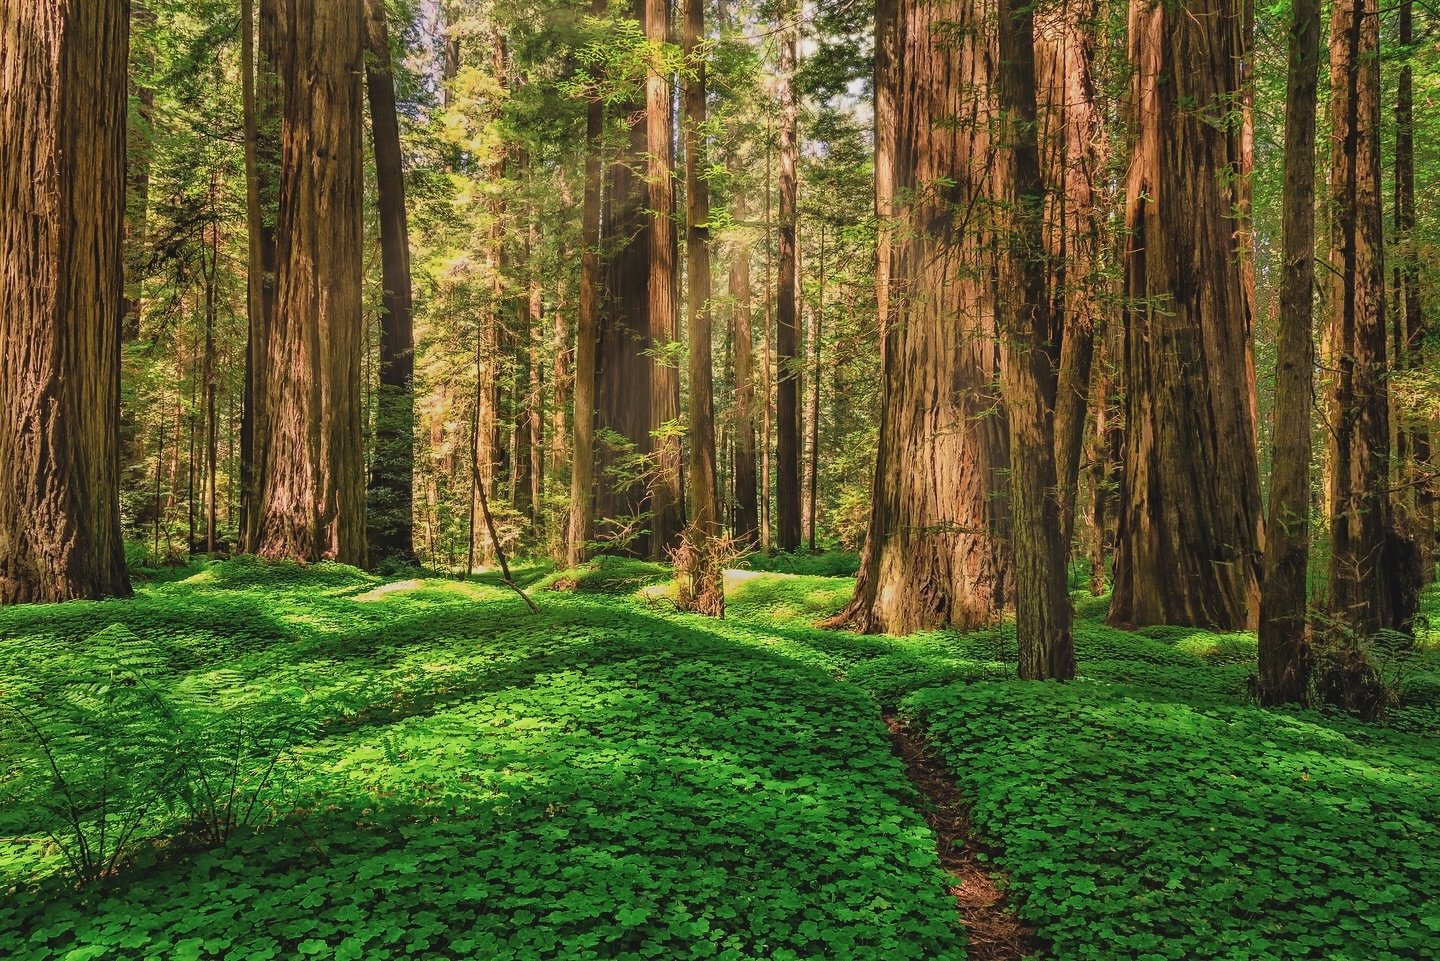 Happy Earth Day! 🌎 

🌳 We&rsquo;re proud monthly donors to @onetreeplanted, and they recently planted nearly 50,000 trees to reforest 200+ acres of California forest that burned in the 2020 Castle Fire. This project restores Sequoia stands and wild